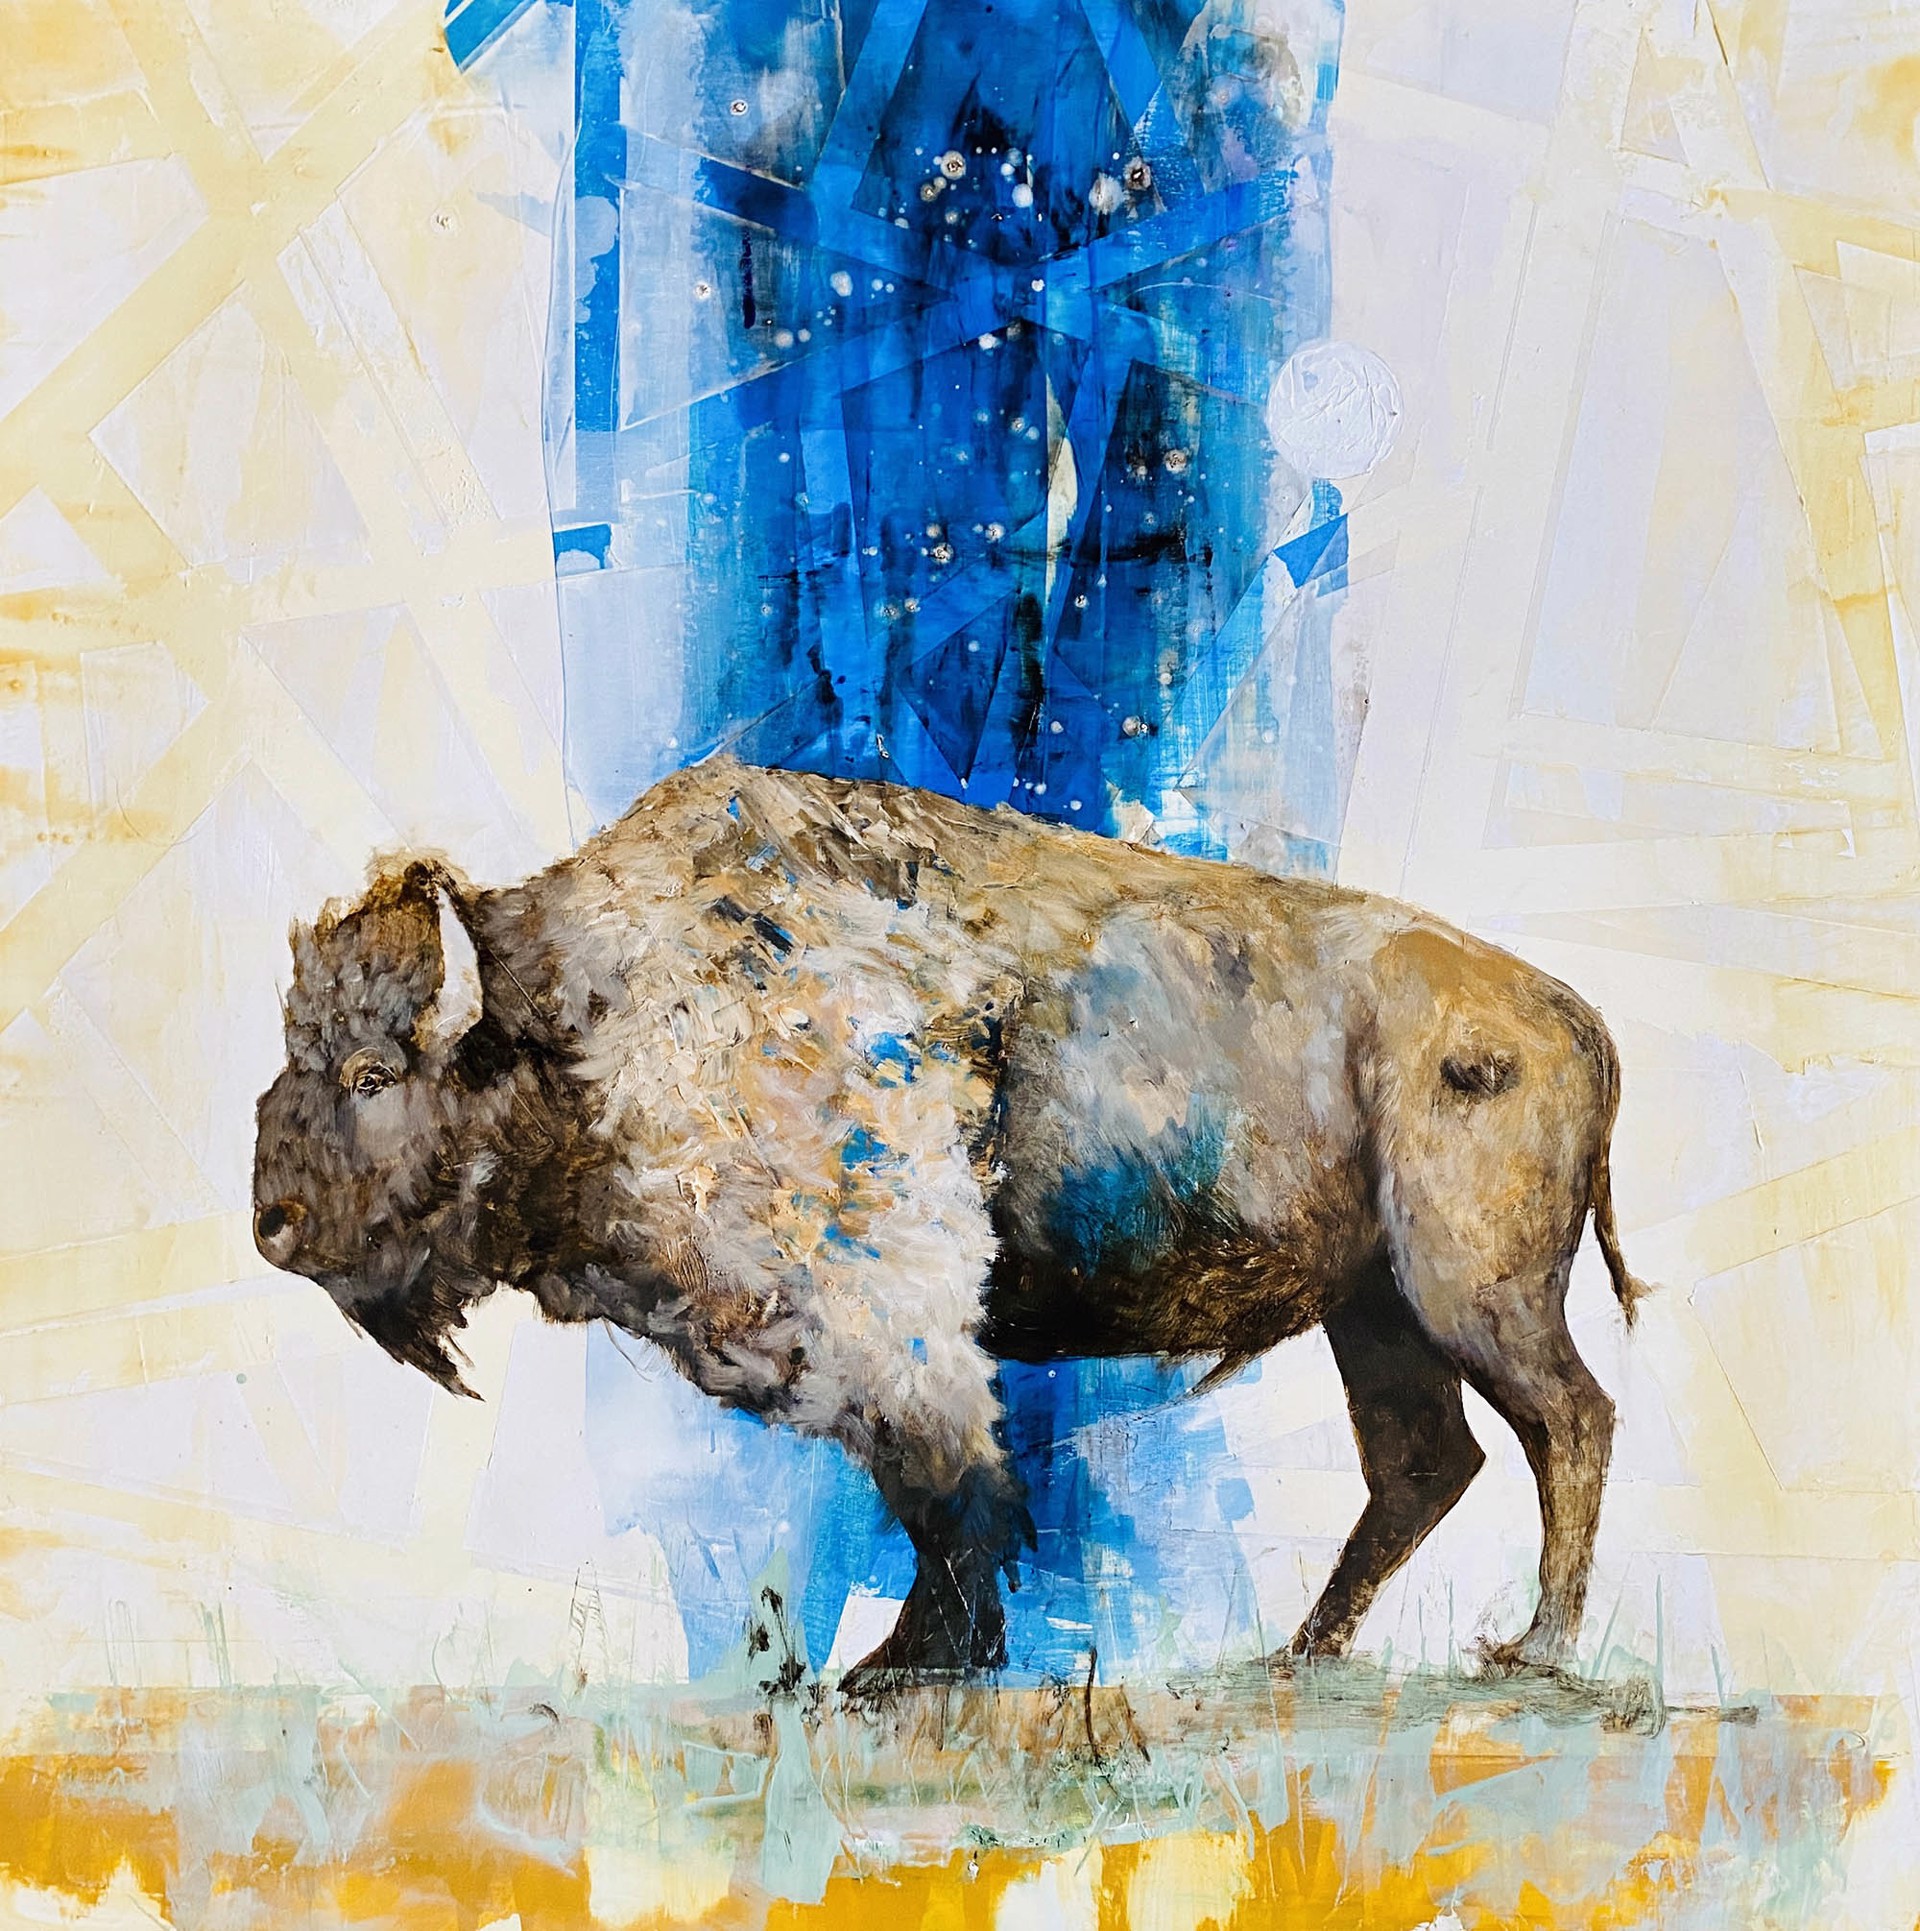 Original Oil Painting Featuring A Standing Bison Over Abstract Background In Blue And Yellow